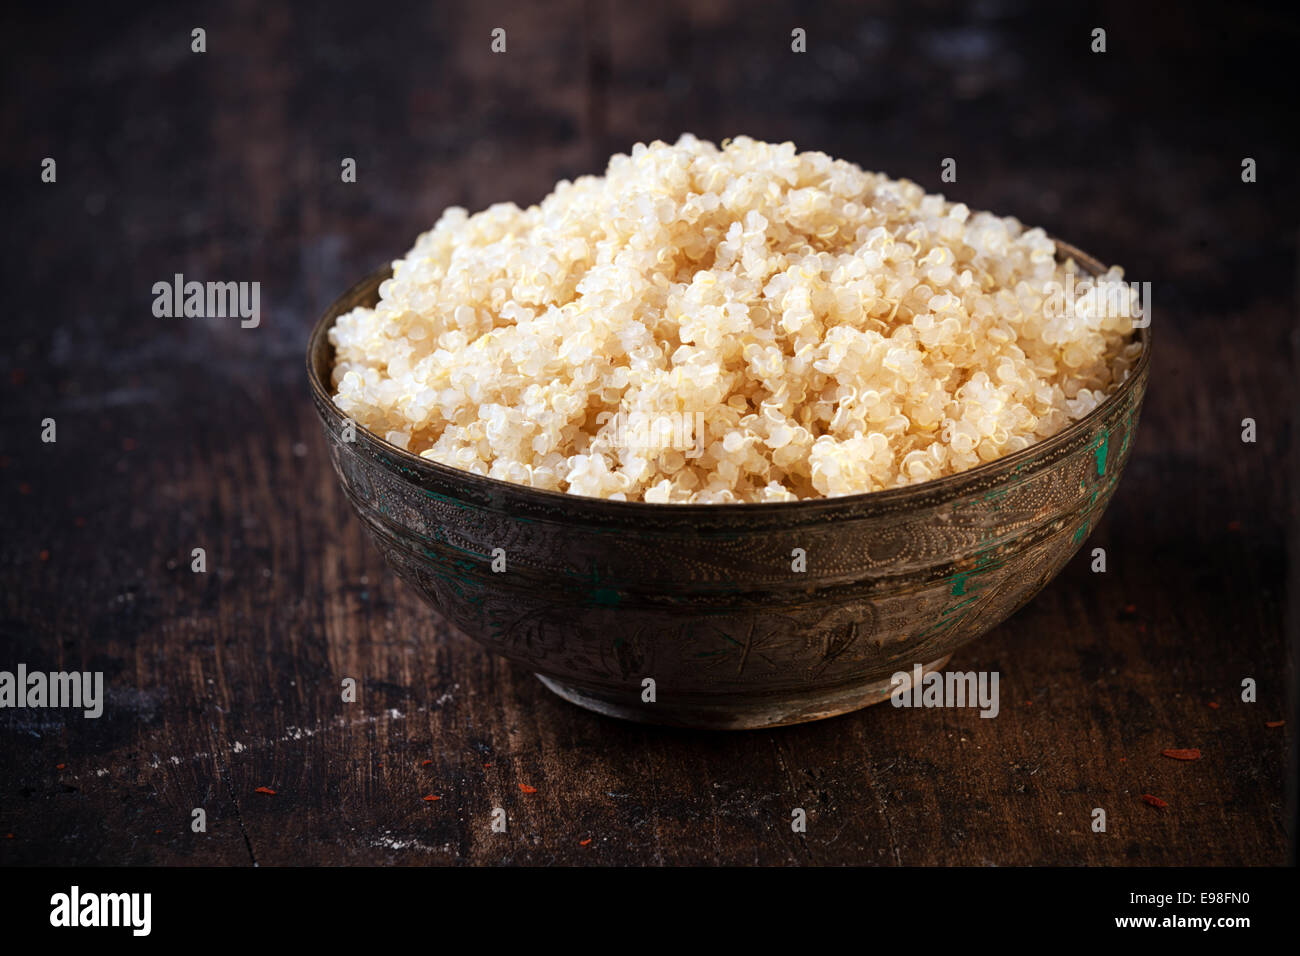 Side angle view of a heaped rustic bowl of healthy cooked quinoa, a pseudo-cereal whose seeds are rich in protein and nutrients Stock Photo